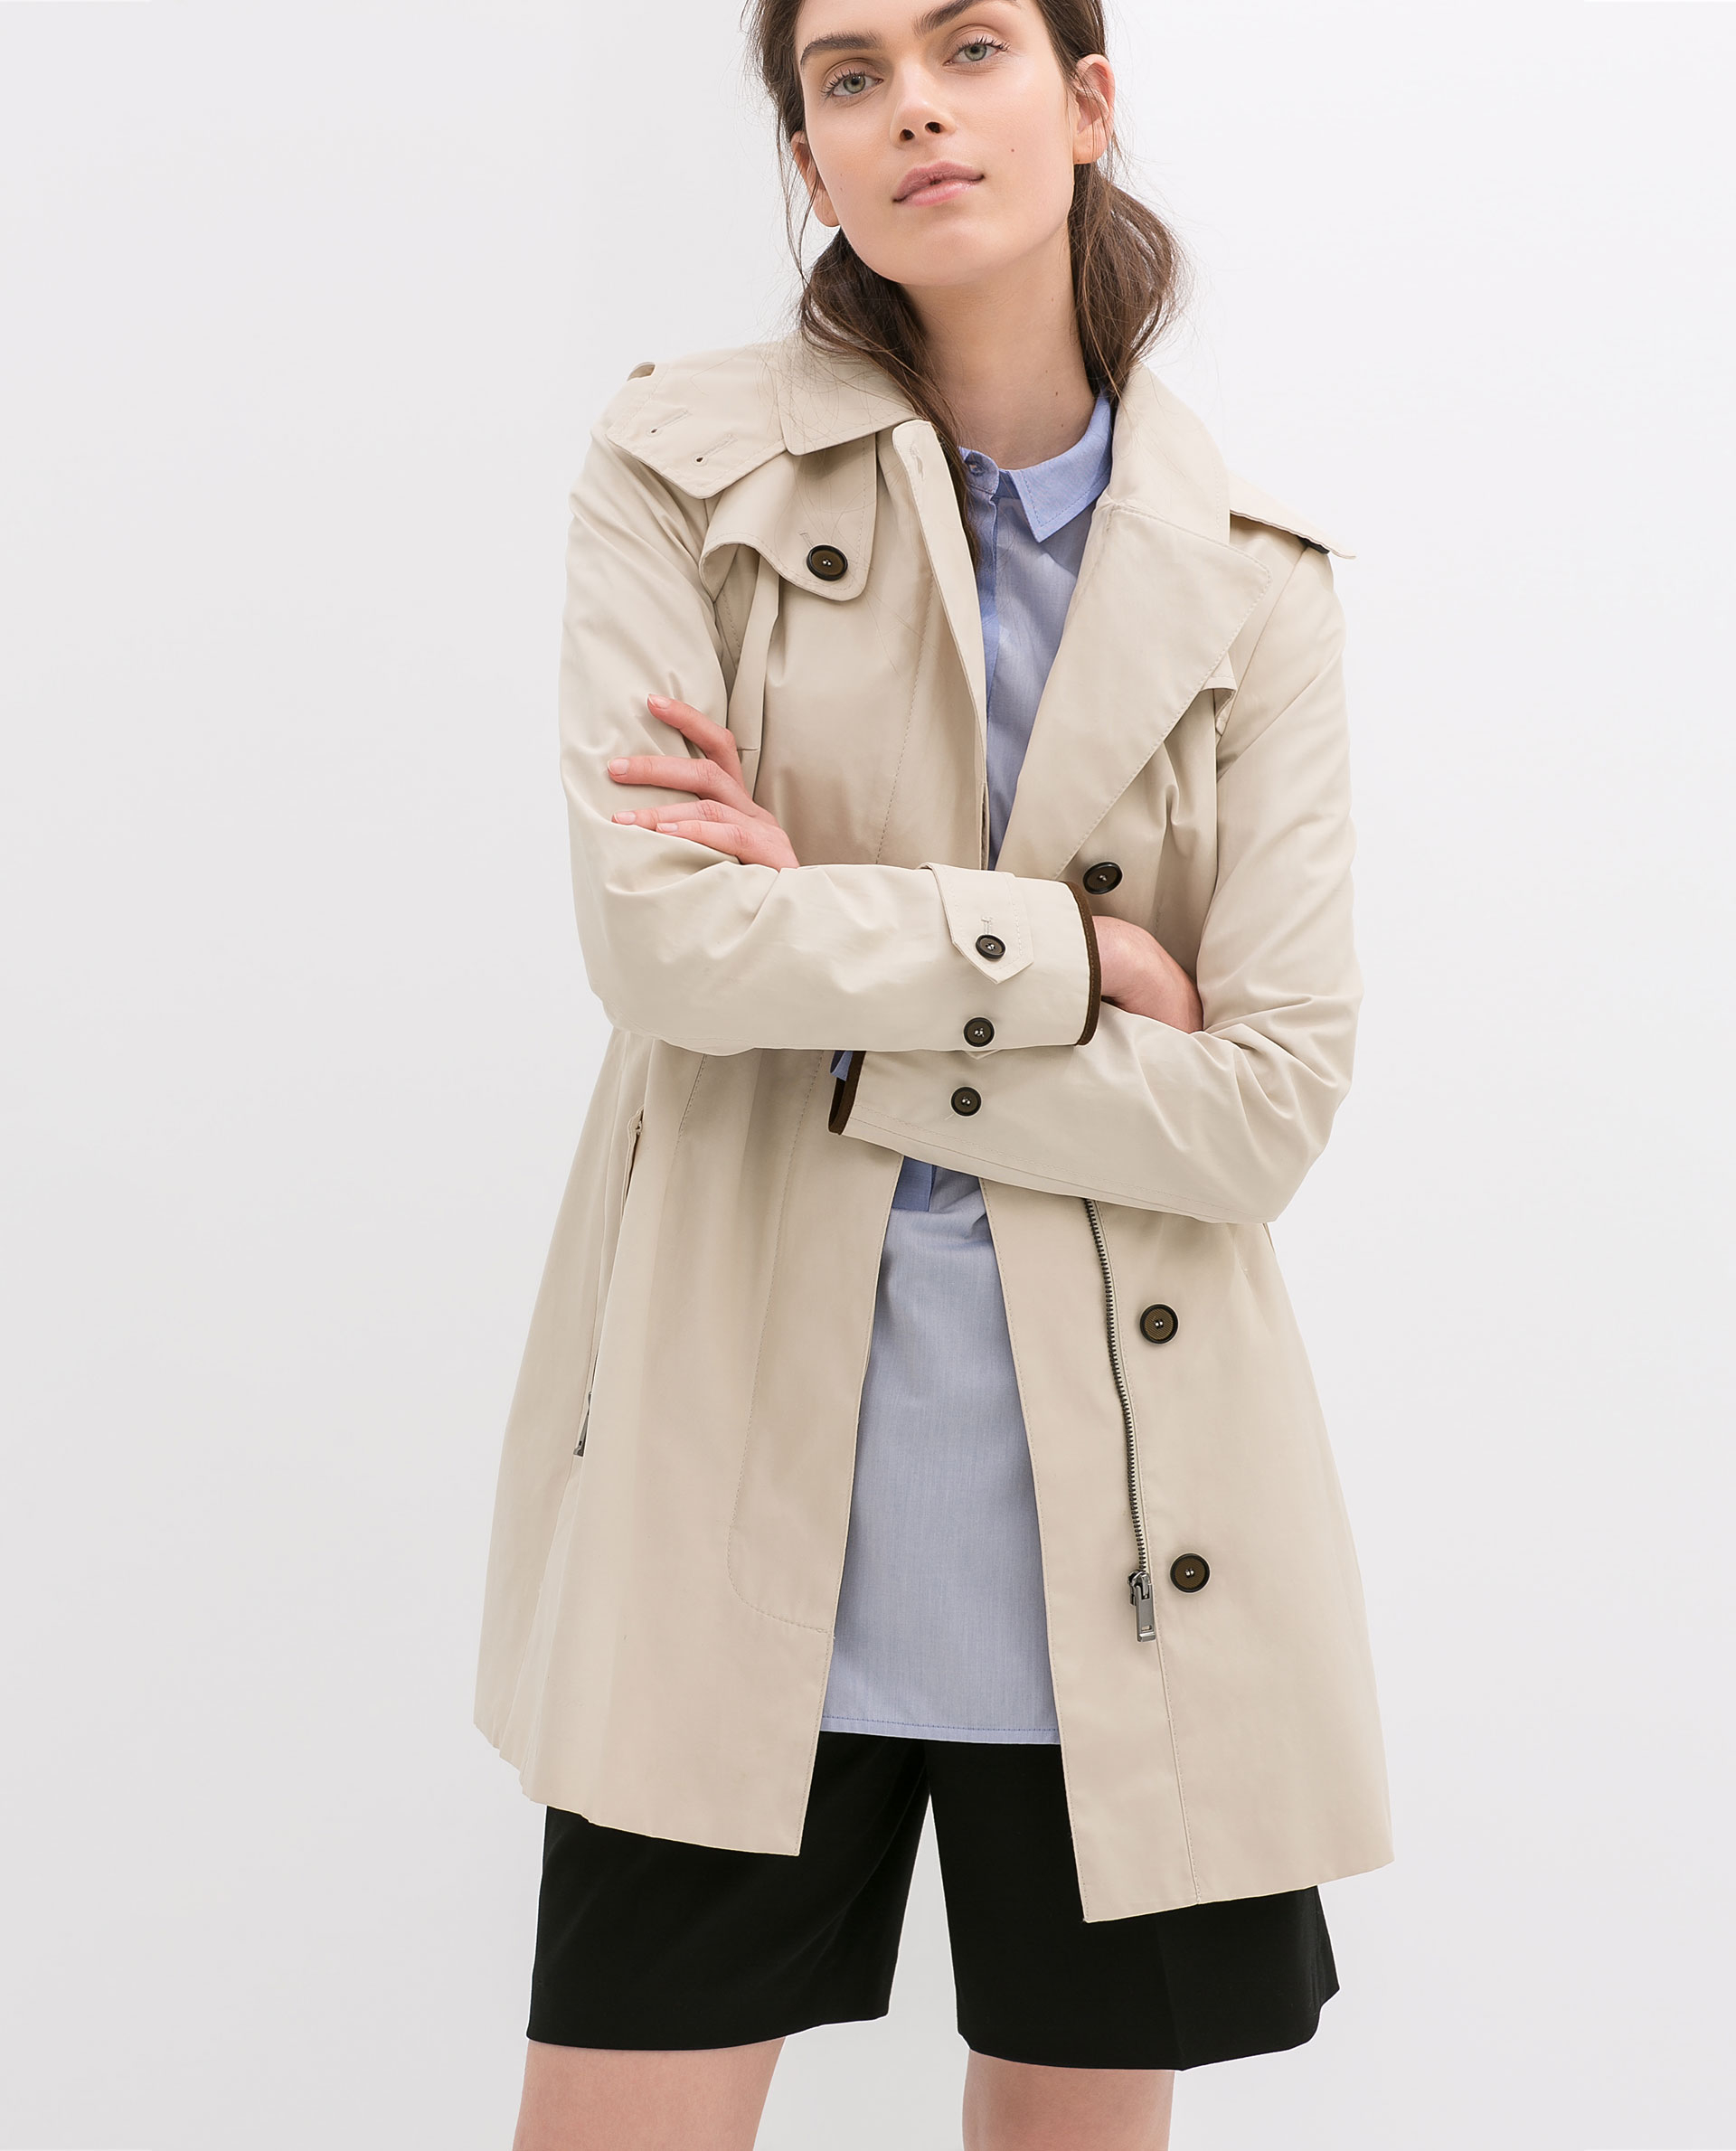 Zara Short Hooded Trench Coat in Natural | Lyst